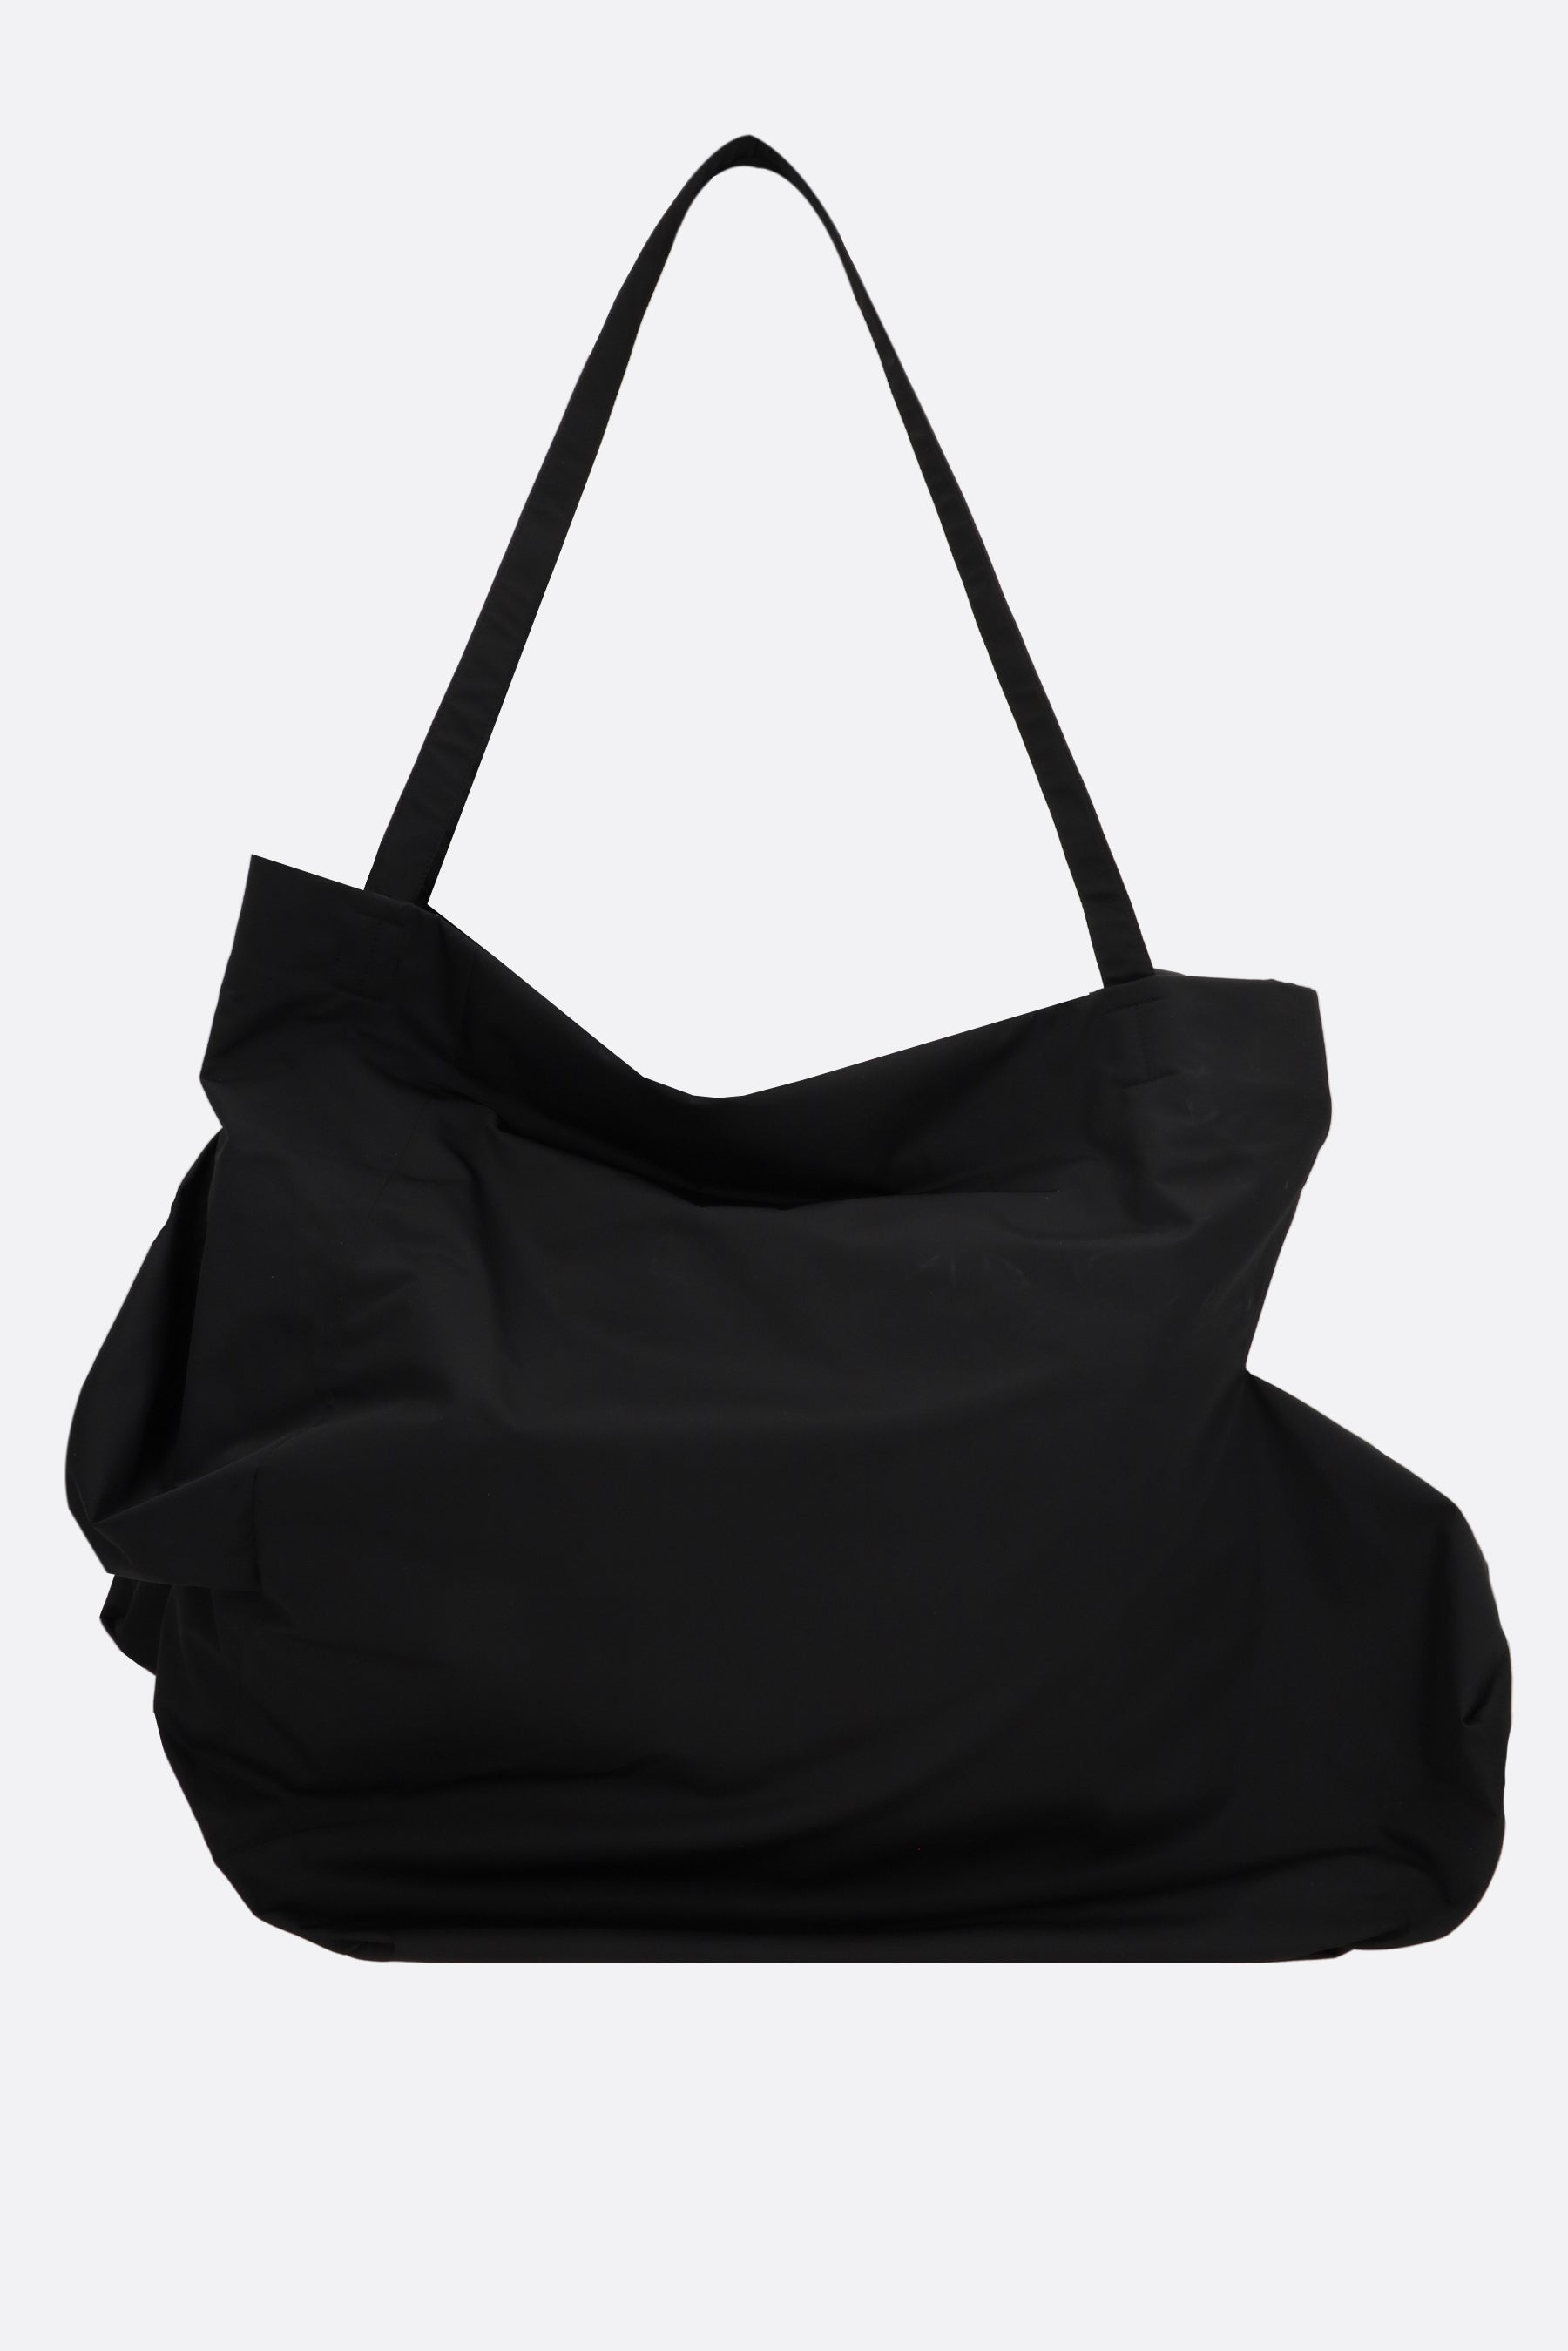 Unevenness twill tote bag